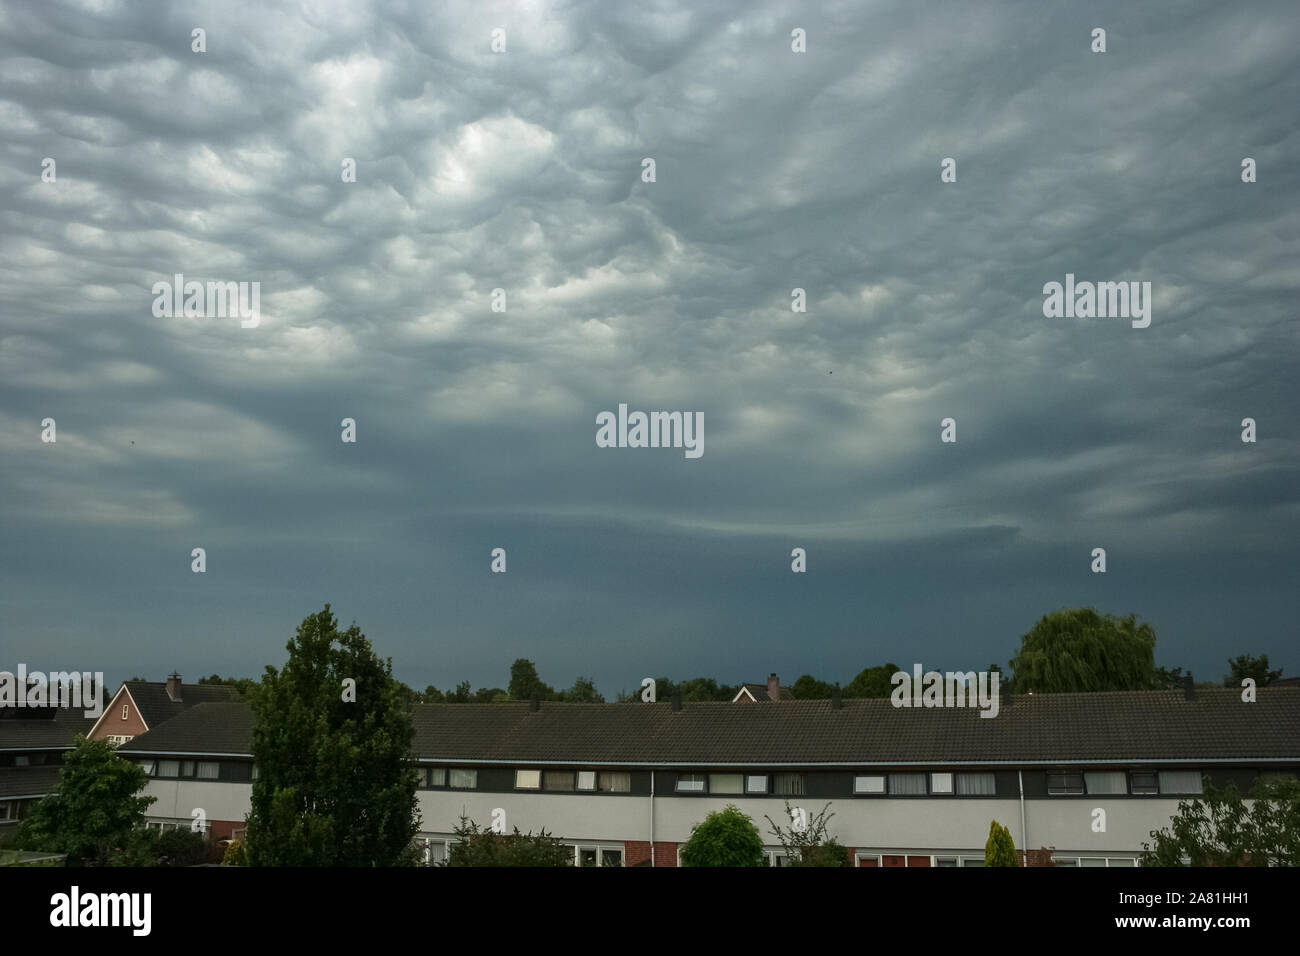 Unusual clouds named Altocumulus undulatus asperitas, or bubble clouds, near Utrecht, Holland. These strange clouds are associated with thunderstorms. Stock Photo